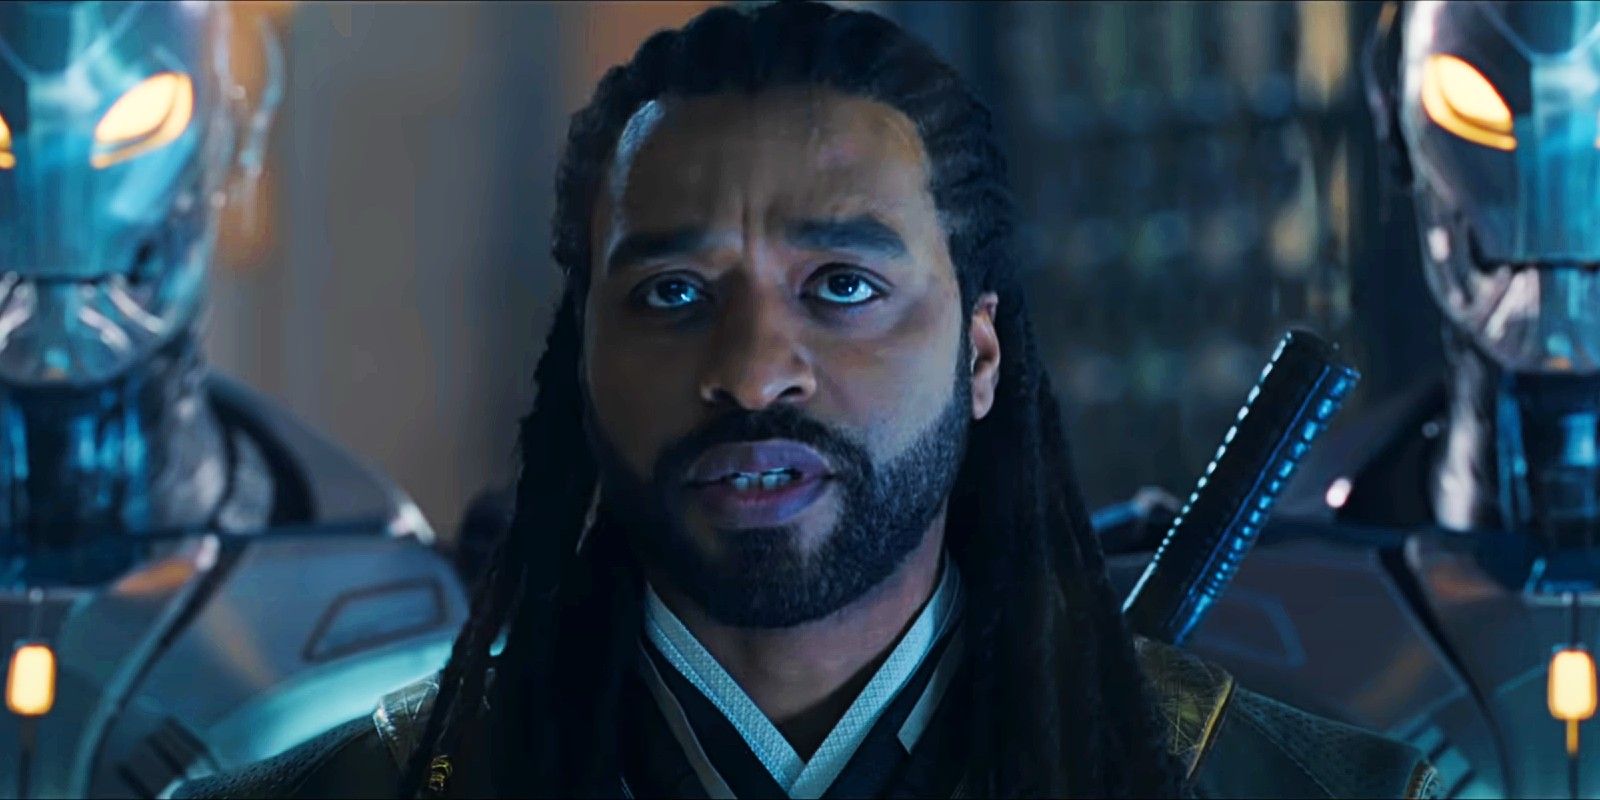 Chiwetel Ejiofor as Mordo in Doctor Strange 2 in front of robot army